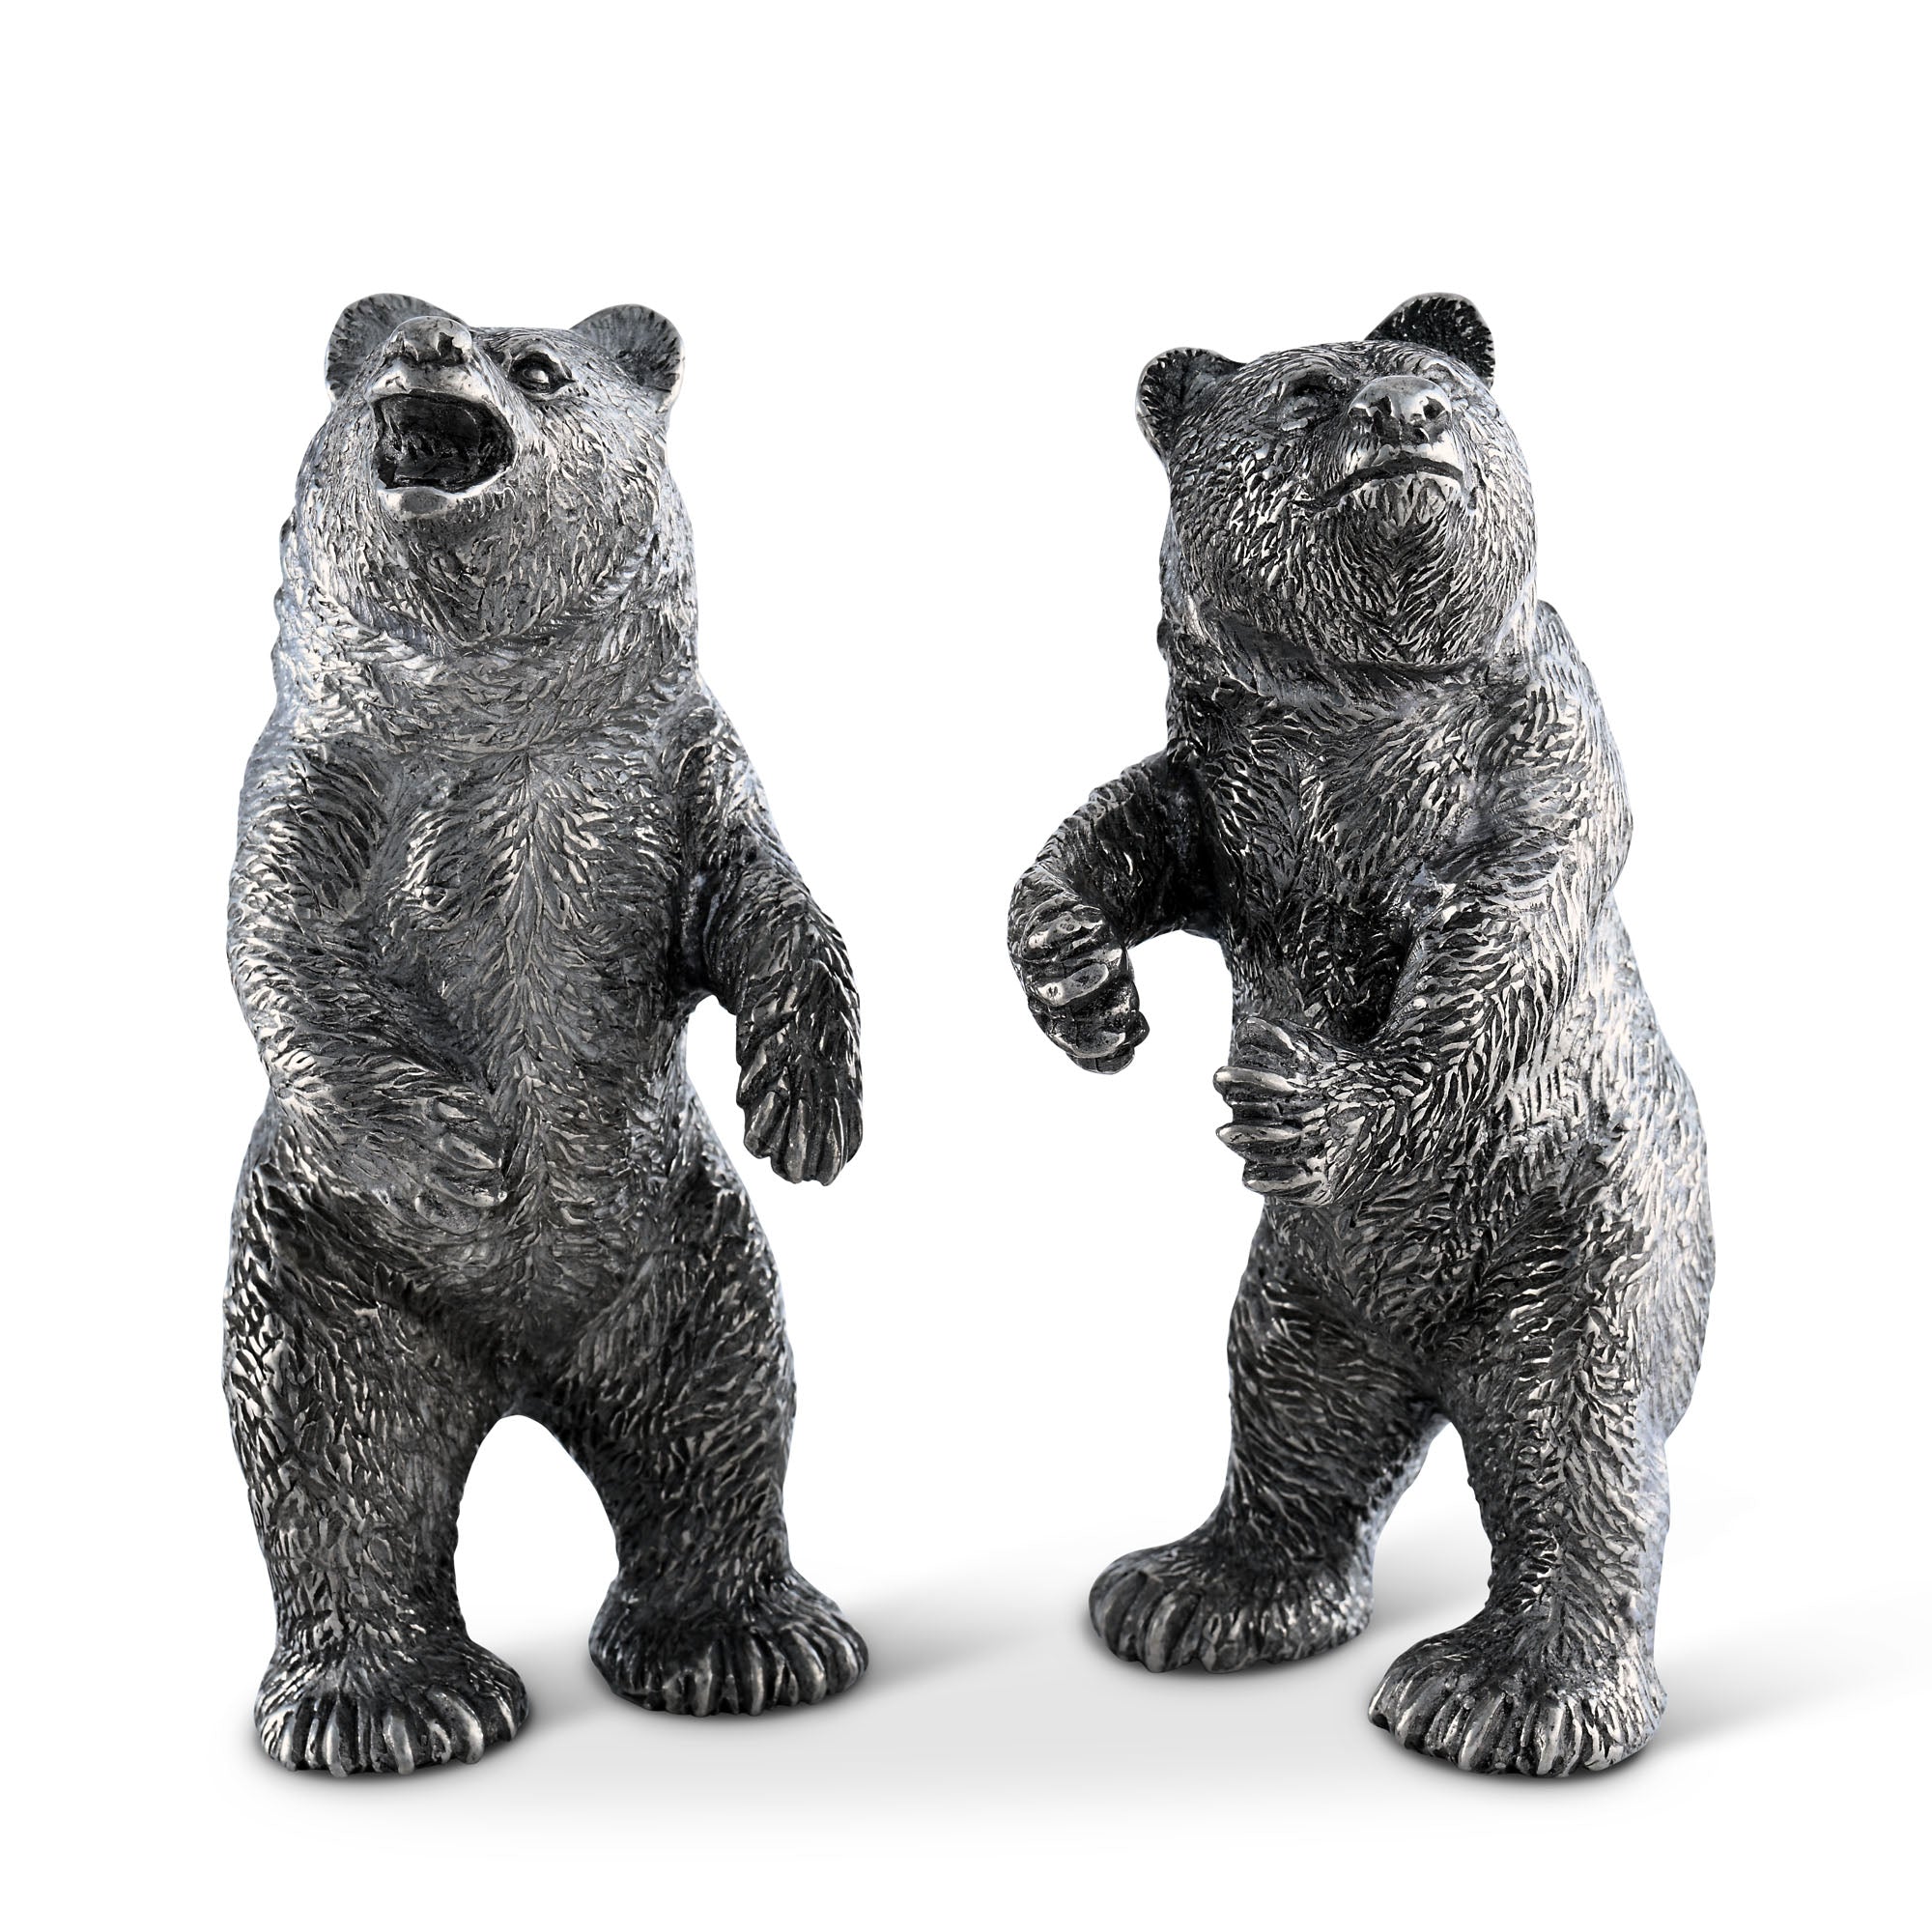 Vagabond House Salt and Pepper - Grizzly Bear Product Image